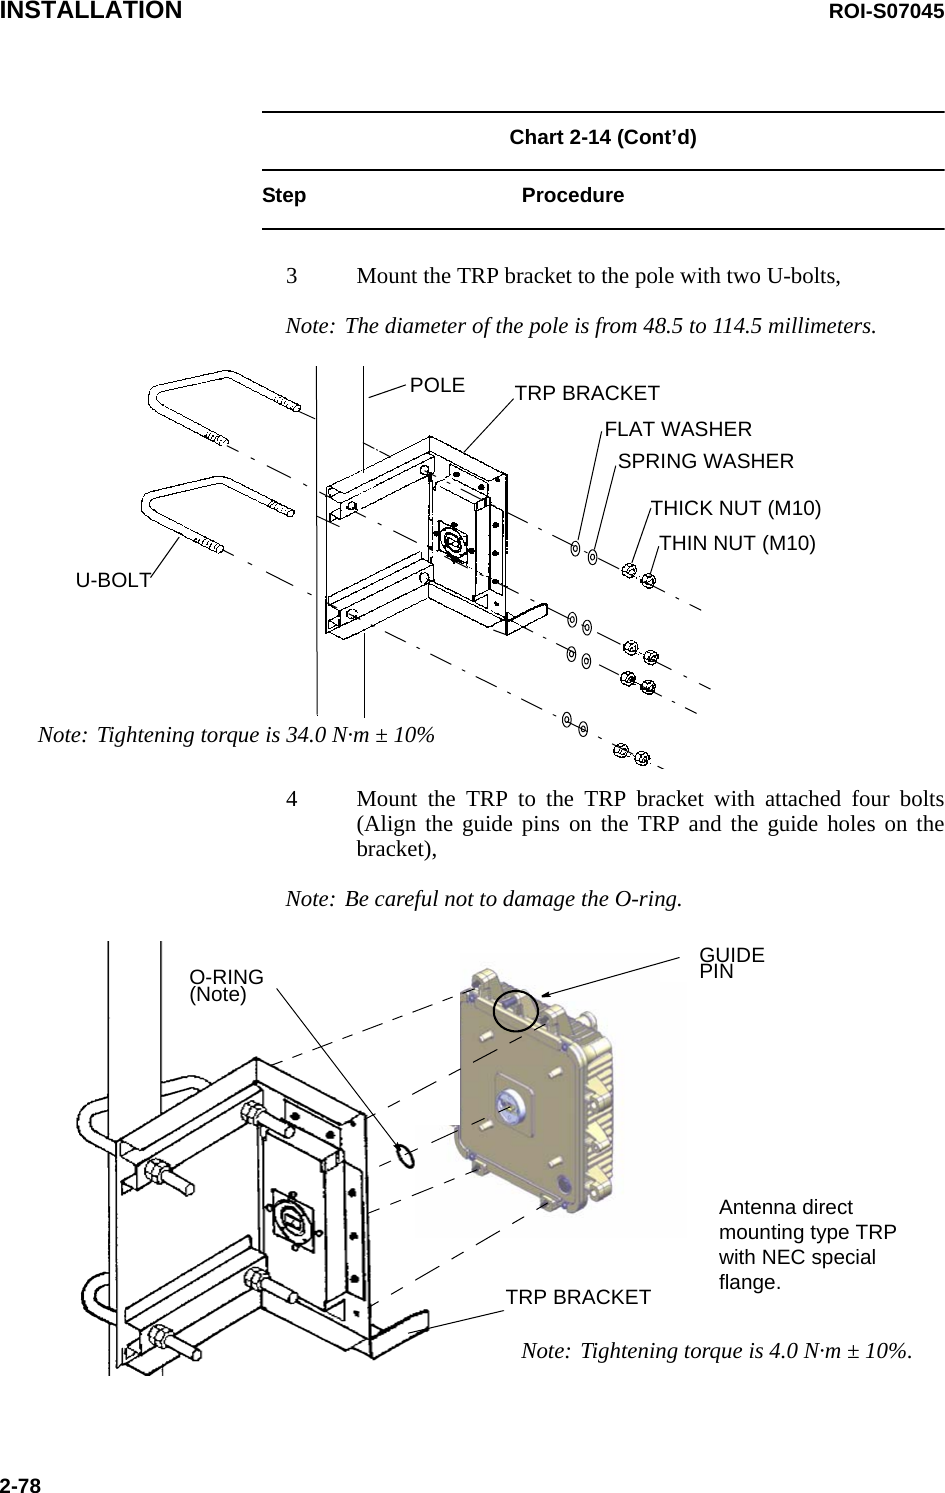 INSTALLATION ROI-S070452-78Chart 2-14 (Cont’d)Step Procedure3 Mount the TRP bracket to the pole with two U-bolts,Note: The diameter of the pole is from 48.5 to 114.5 millimeters.4 Mount the TRP to the TRP bracket with attached four bolts(Align the guide pins on the TRP and the guide holes on thebracket),Note: Be careful not to damage the O-ring.TRP BRACKETU-BOLTPOLEFLAT WASHERSPRING WASHERTHIN NUT (M10)THICK NUT (M10)Note: Tightening torque is 34.0 N·m ± 10%TRP BRACKETAntenna direct mounting type TRP with NEC special flange.O-RING(Note)GUIDE PINNote: Tightening torque is 4.0 N·m ± 10%.